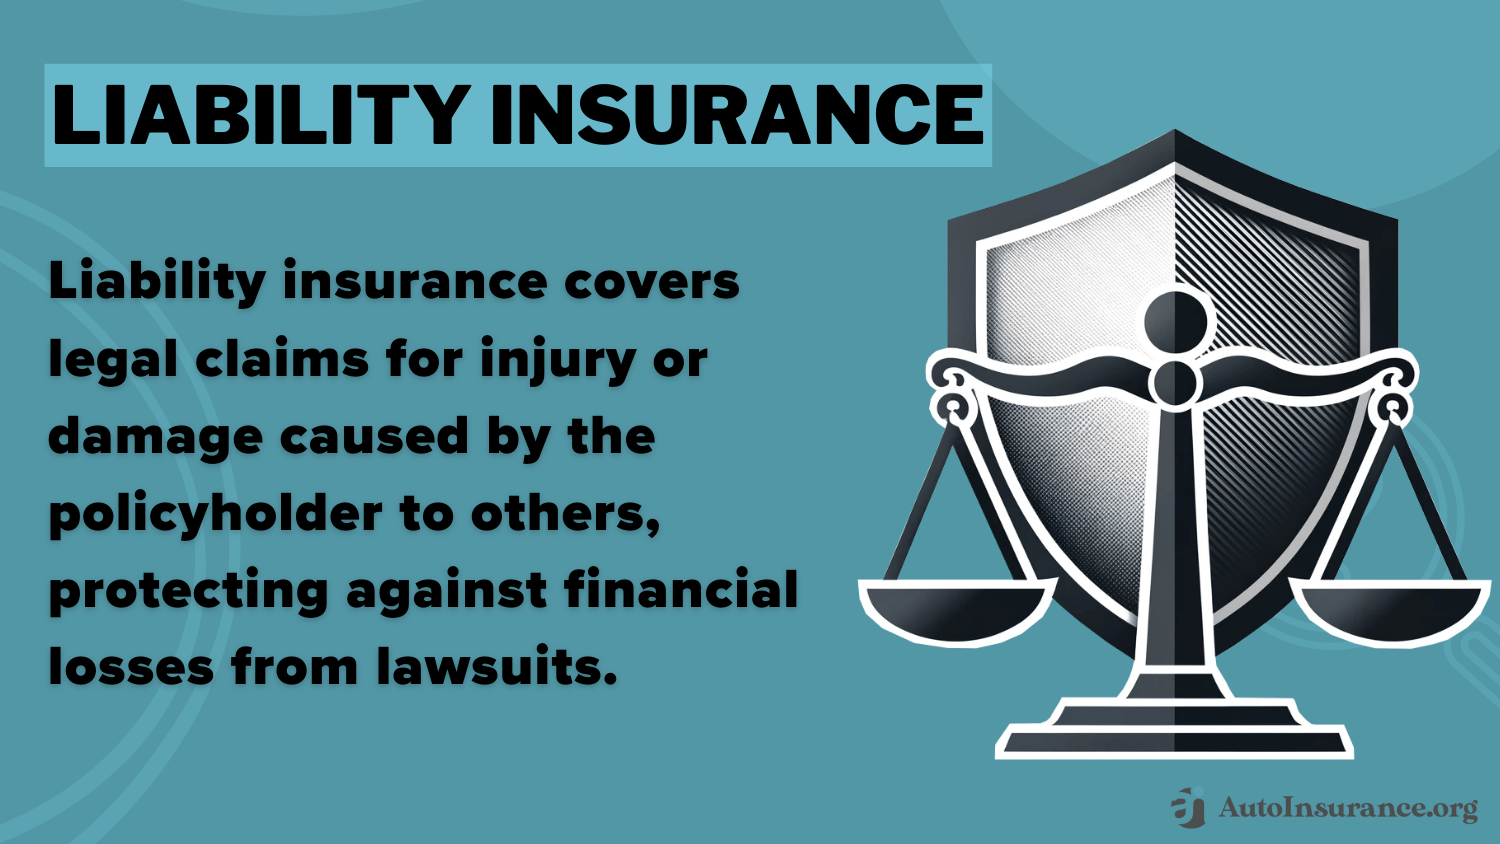 Liability Insurance Definition Card: Does auto insurance cover hitting a pole?